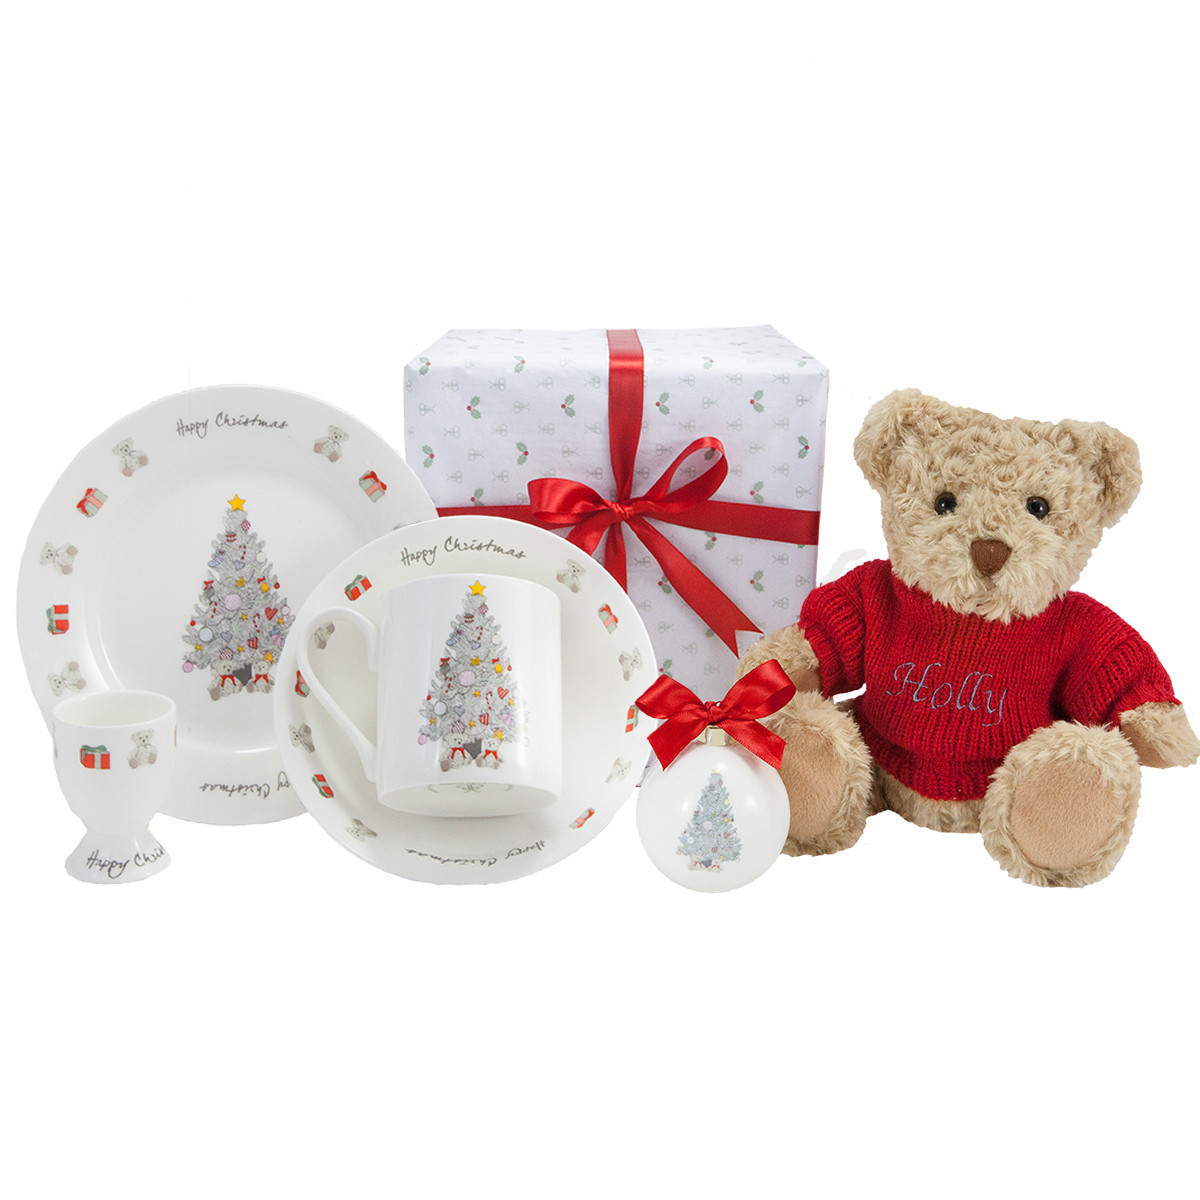 Baby First Christmas Gift Ideas
 The Syders Baby s First Christmas Gift Ideas